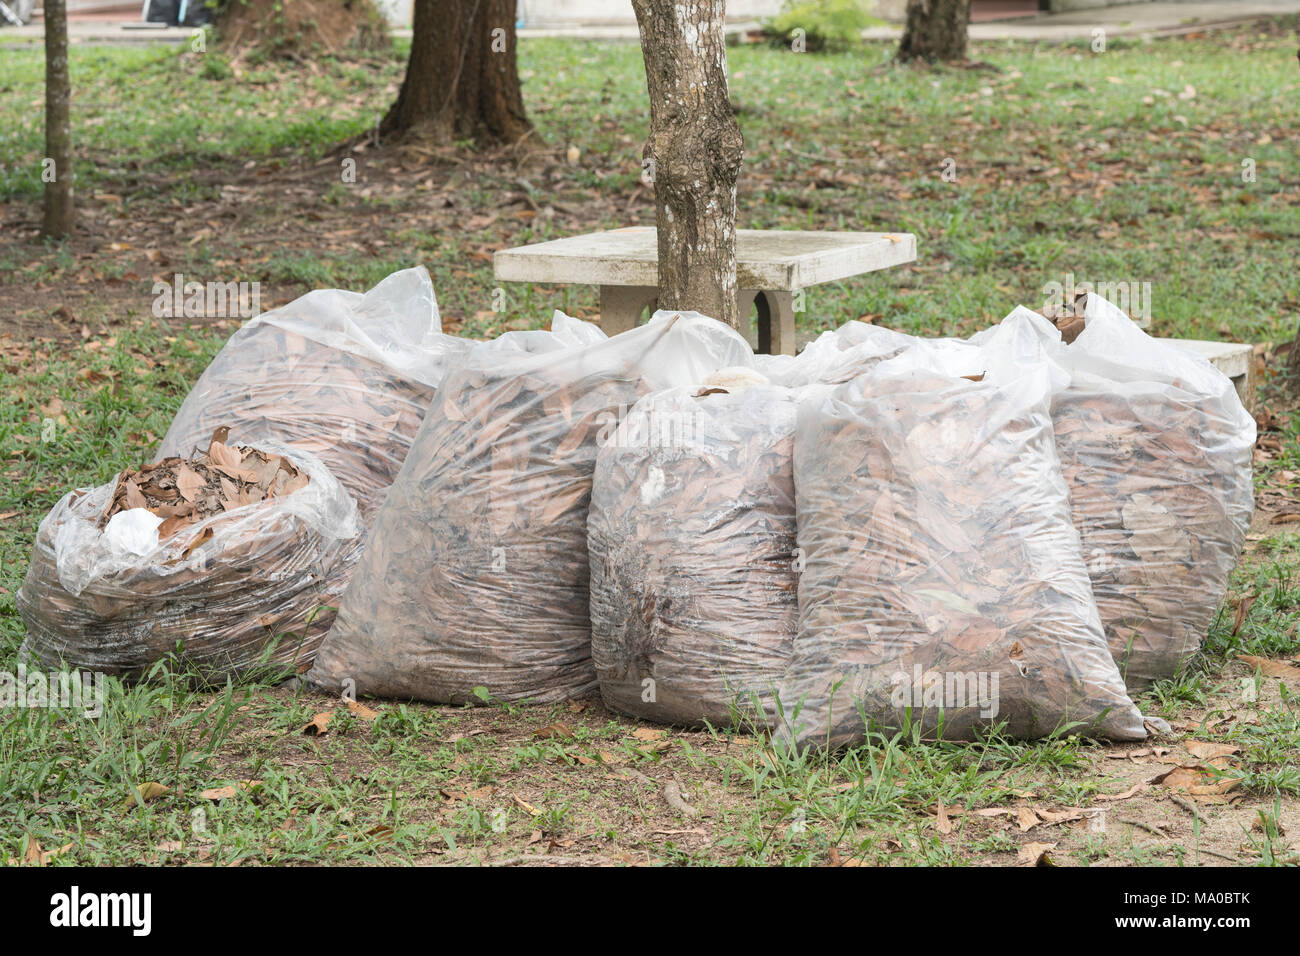 Autumn cleaning leaves,Pile of full white garbage bags on the grass in the park,leaves in bag garbage Stock Photo